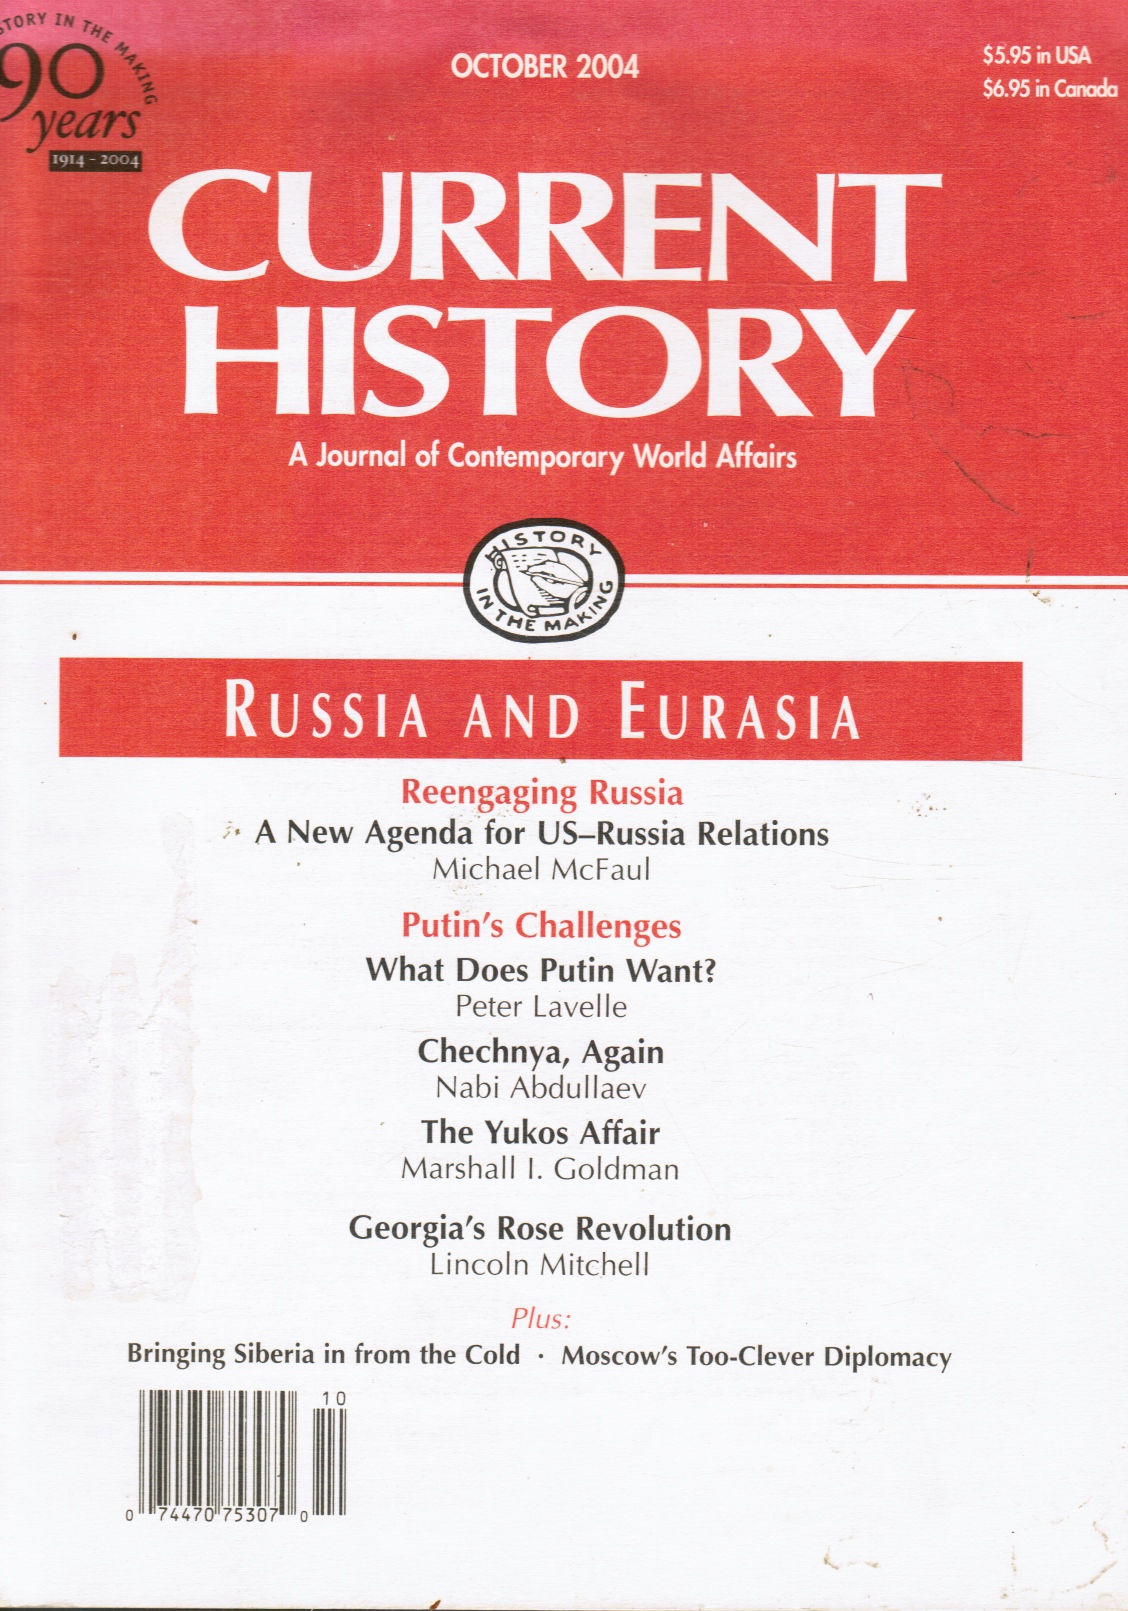 CURRENT HISTORY EDITORS - Current History: October 2004 What Does Putin Want